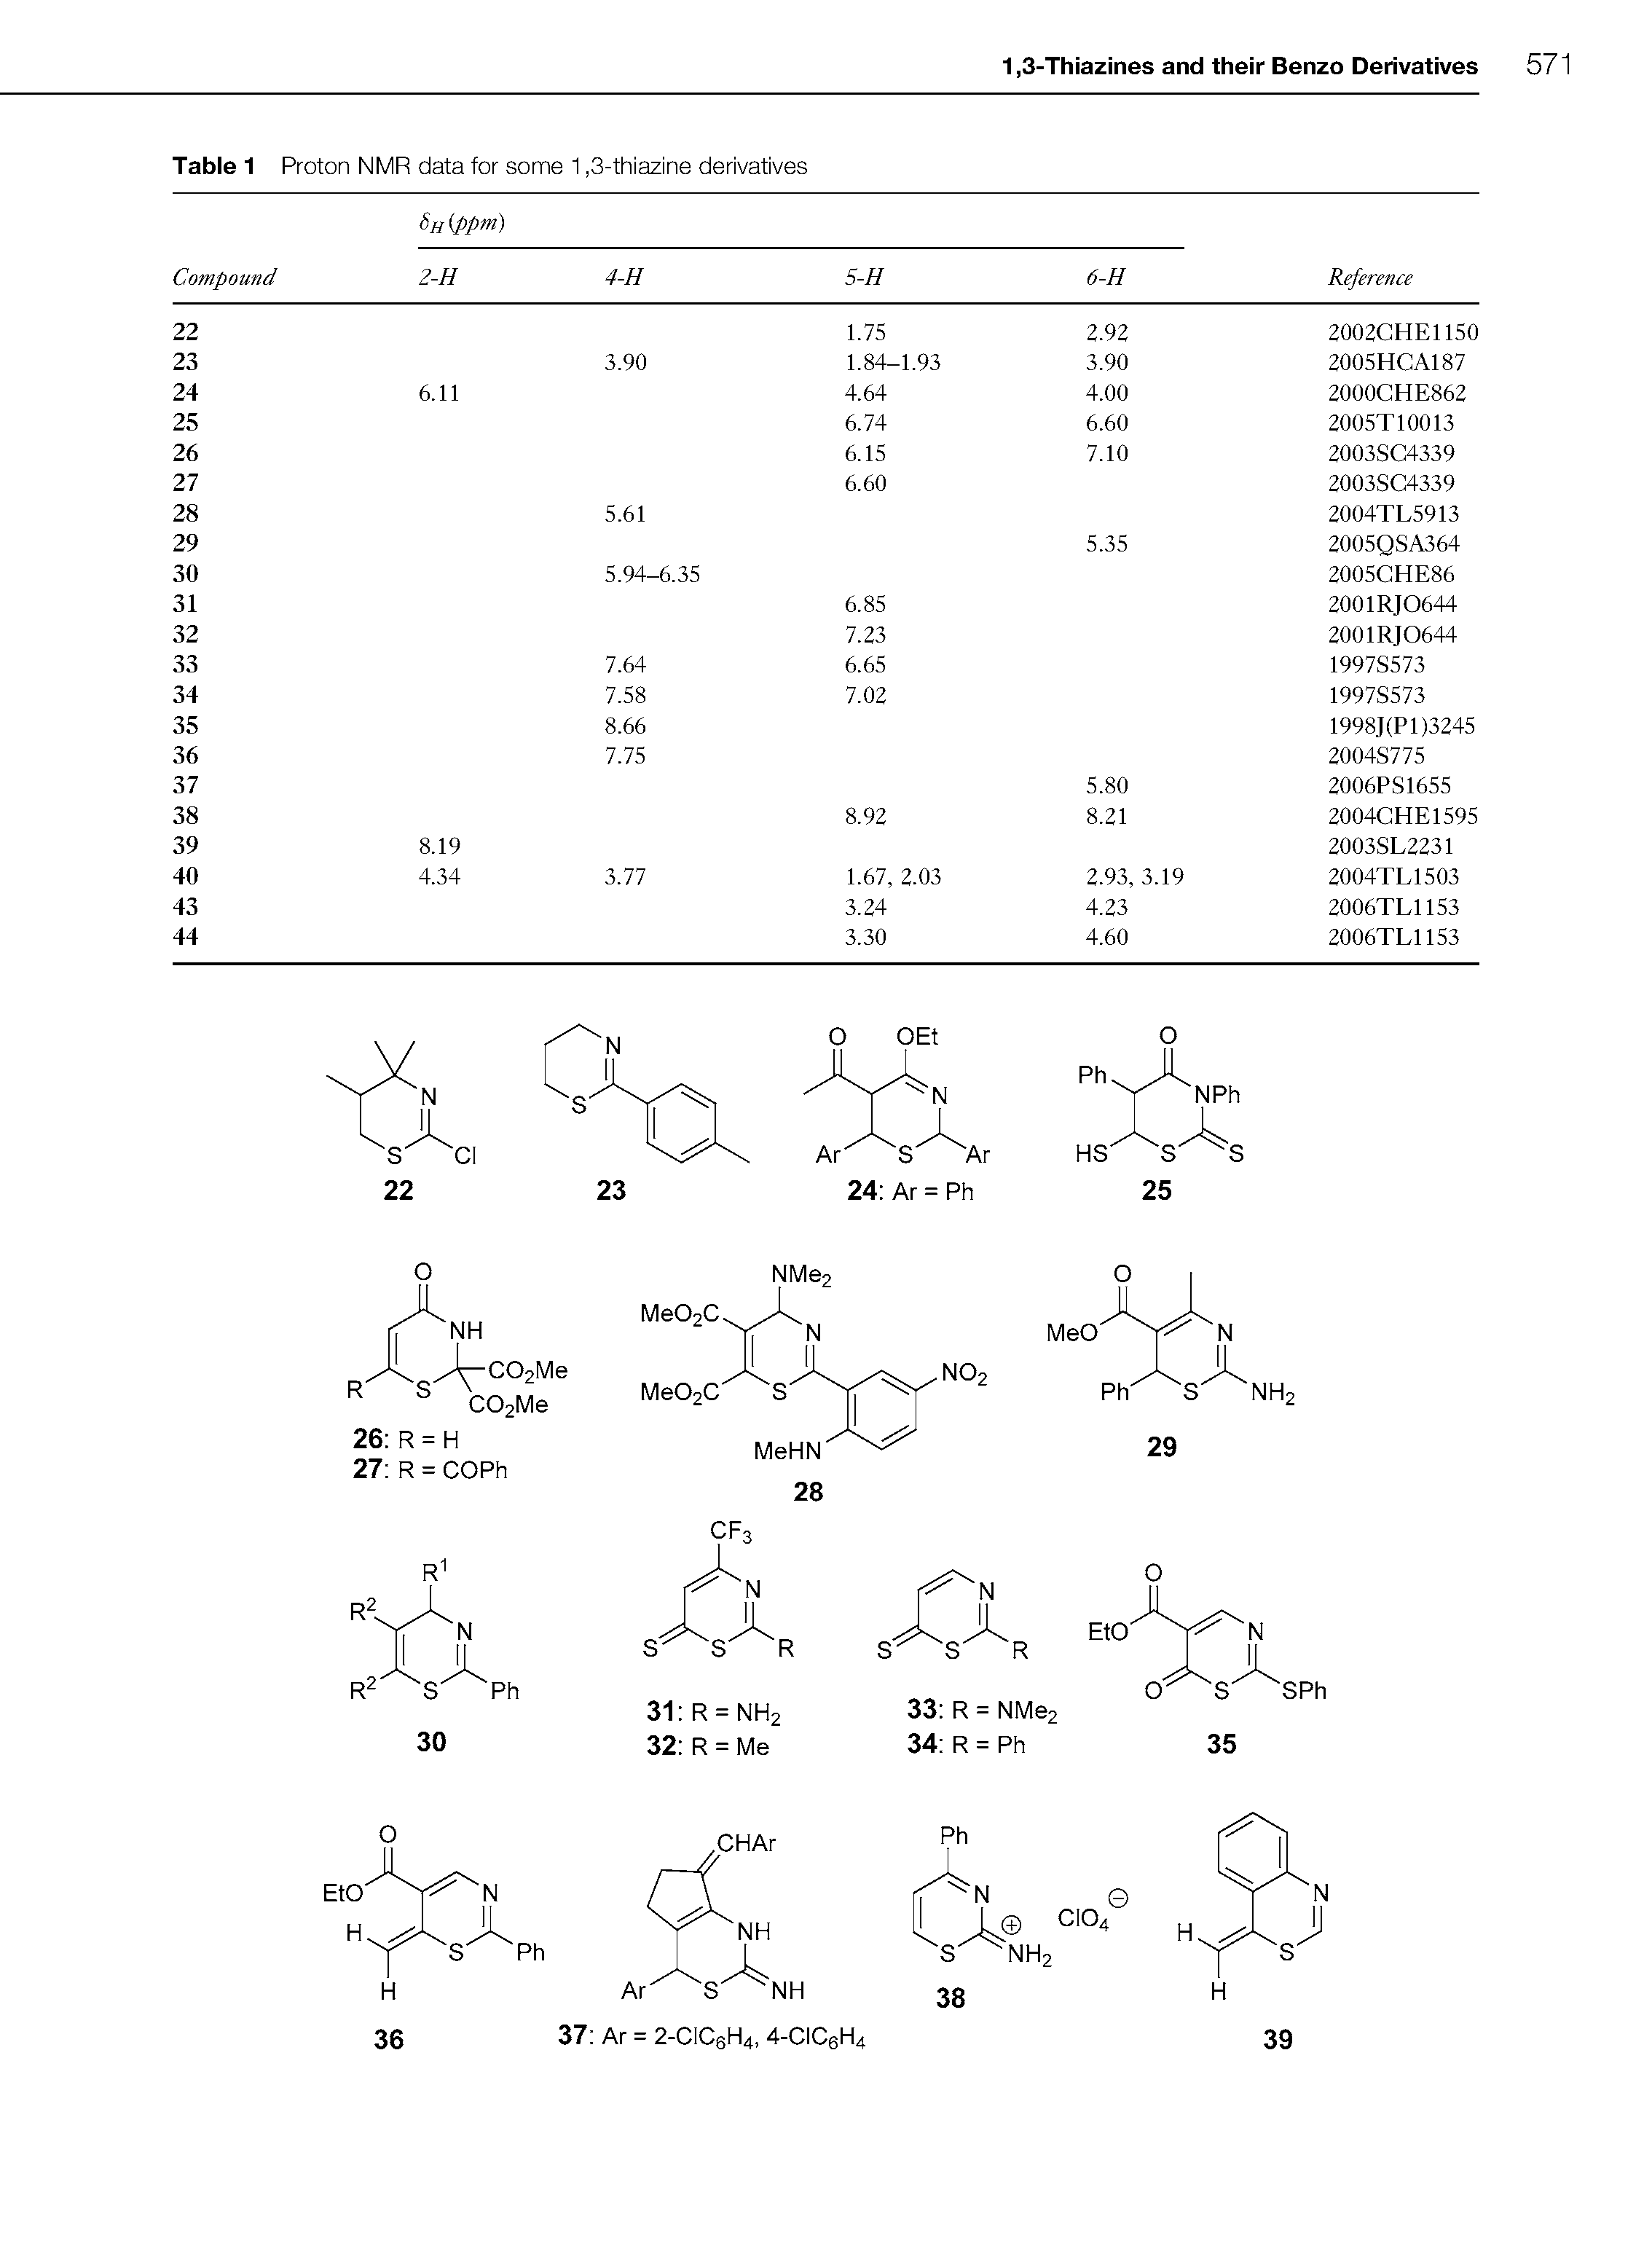 Table 1 Proton NMR data for some 1,3-thiazine derivatives...